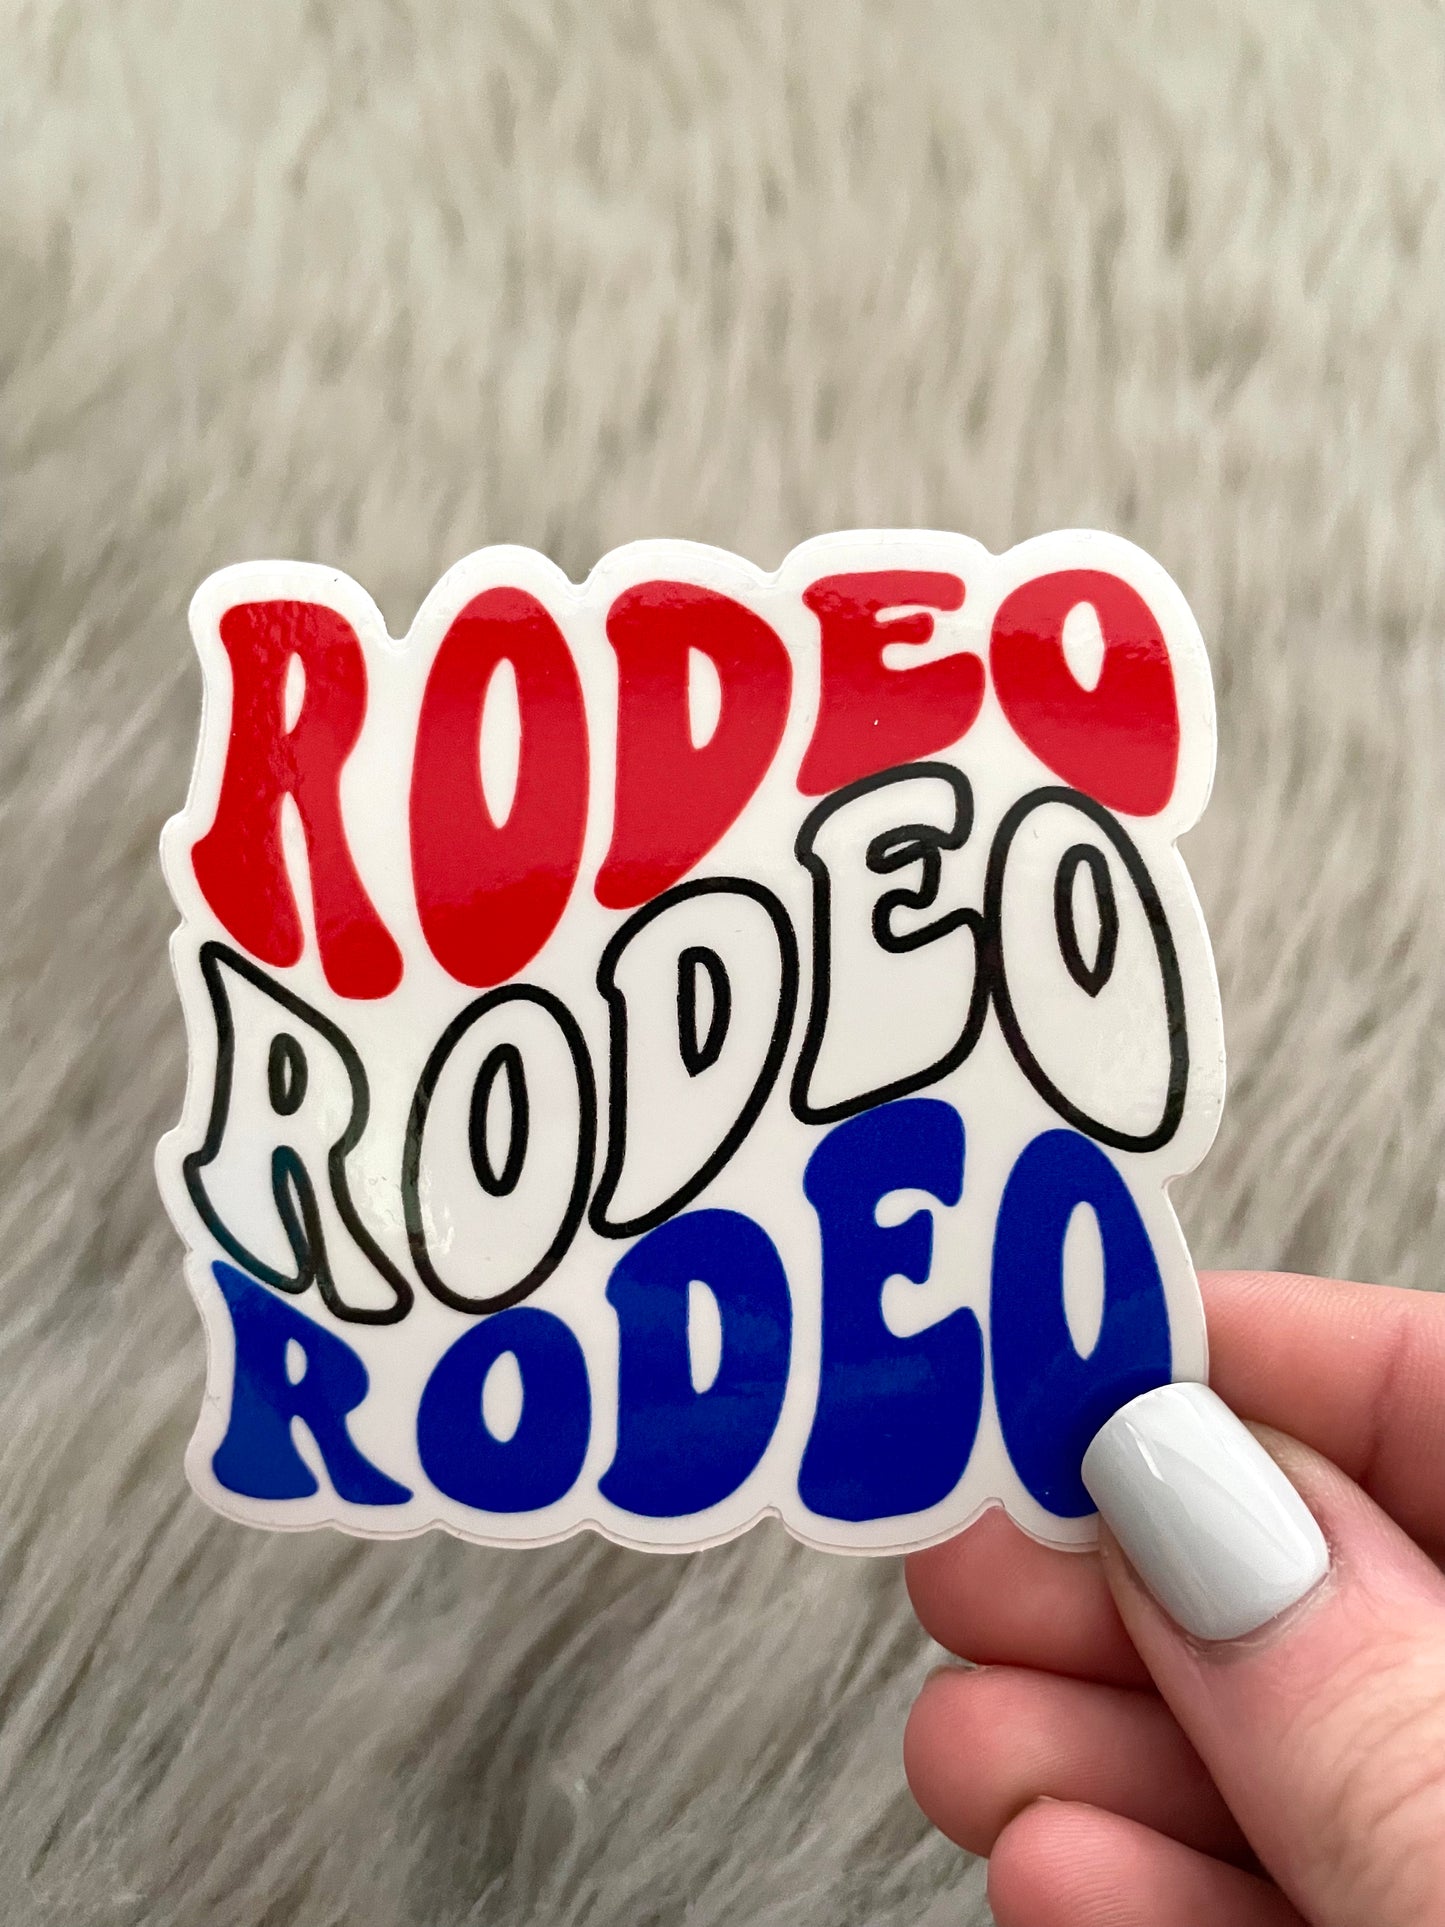 Rodeo Rodeo Rodeo Sticker